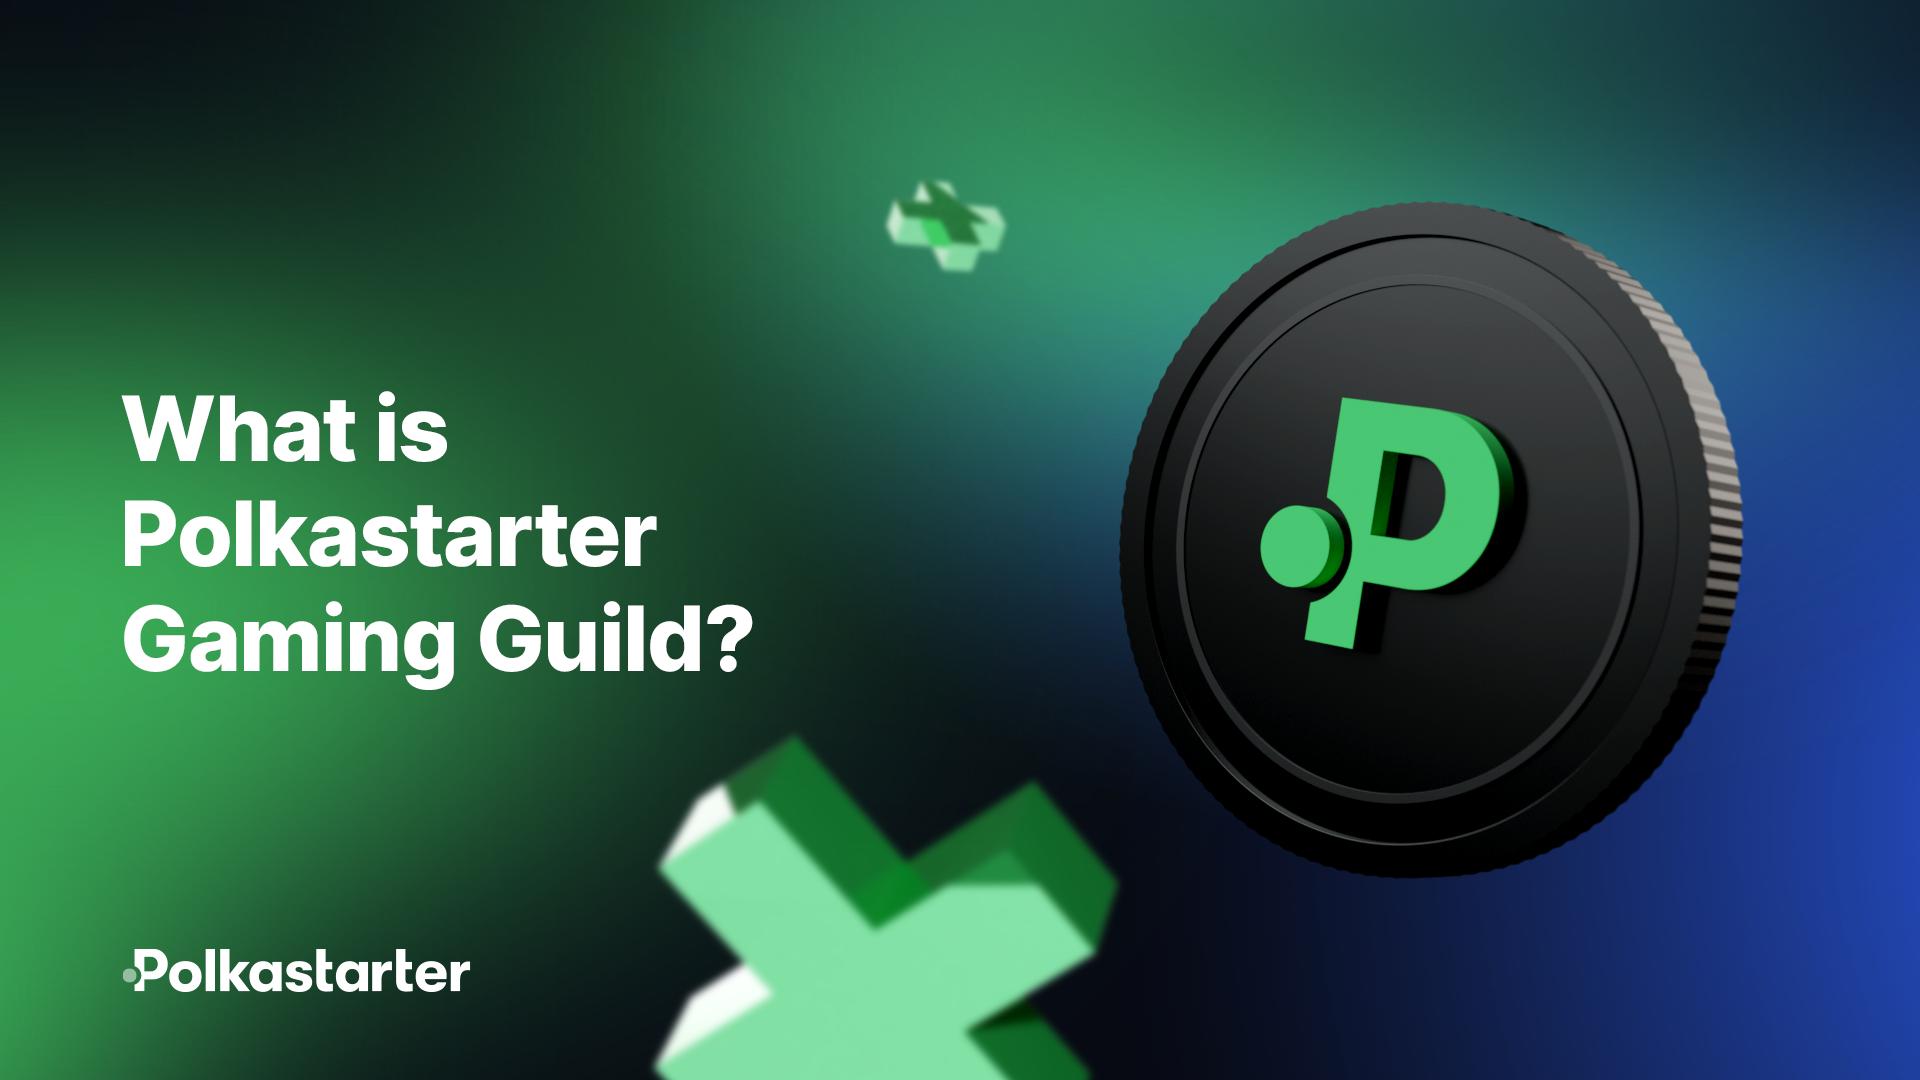 What is the Polkastarter Gaming Guild?